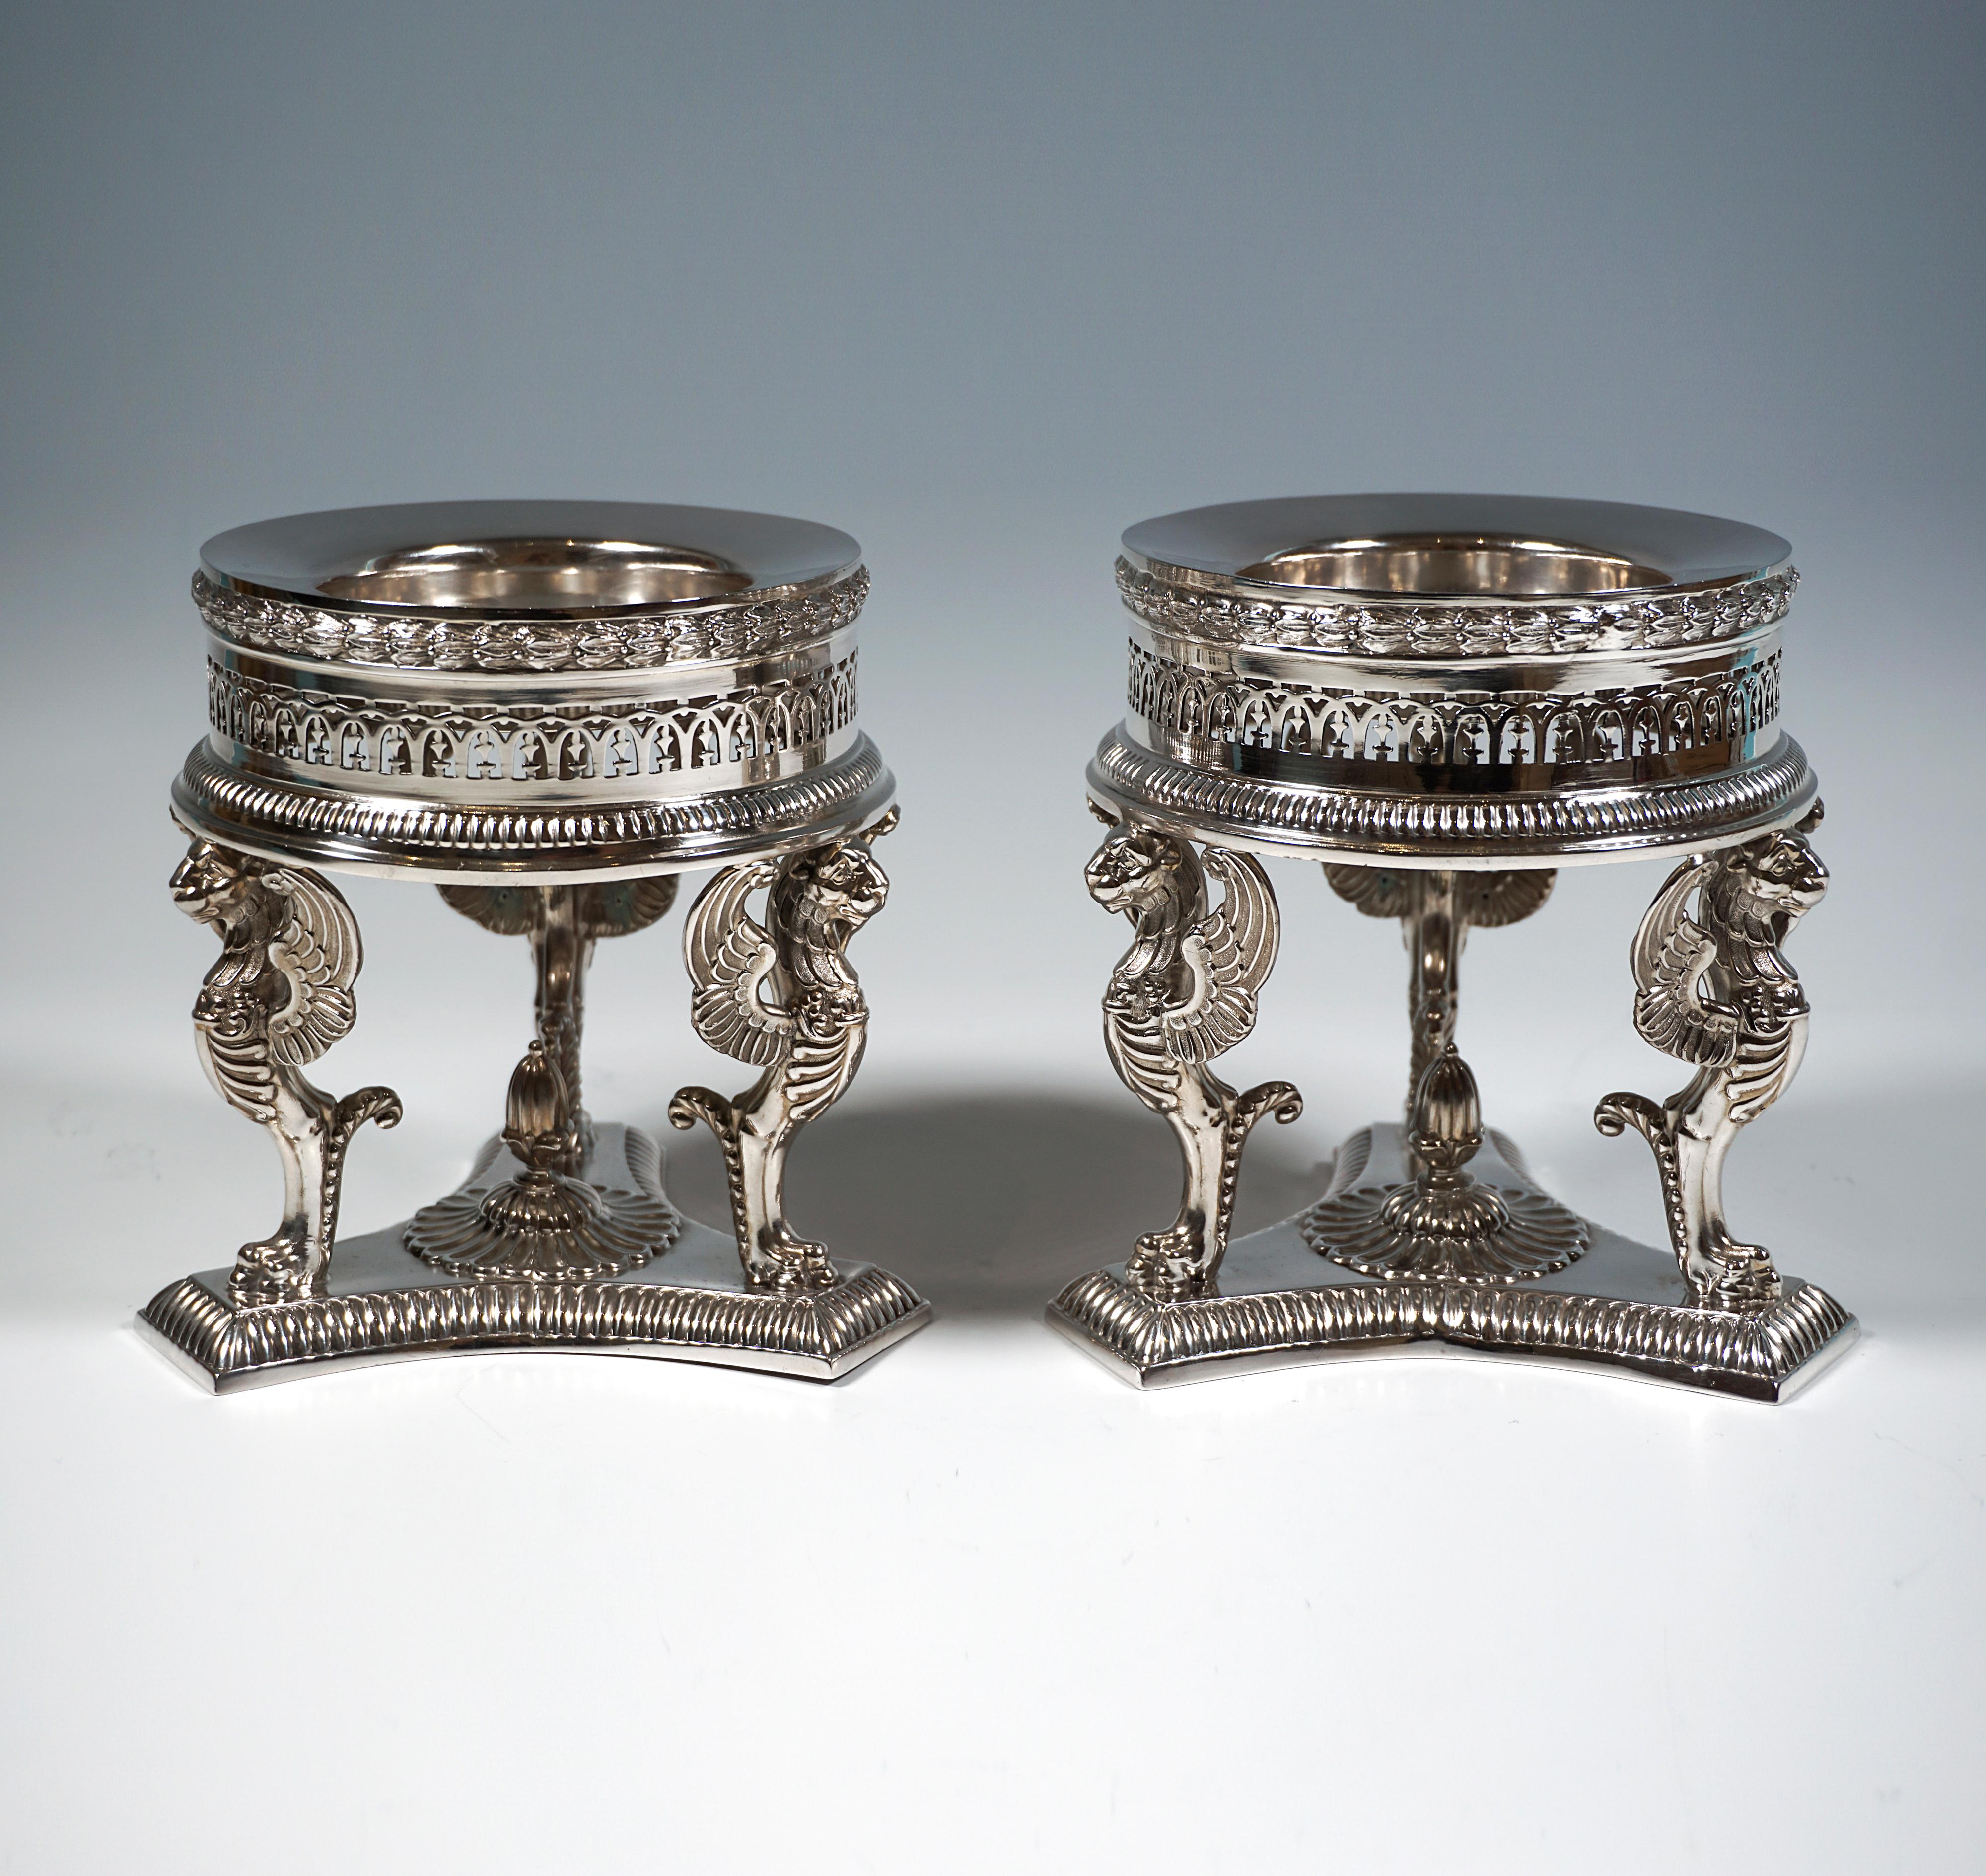 Art Deco Pair Of Silver Centerpieces With Glass Bowls, Bruckmann & Sons for Knewitz c1920 For Sale